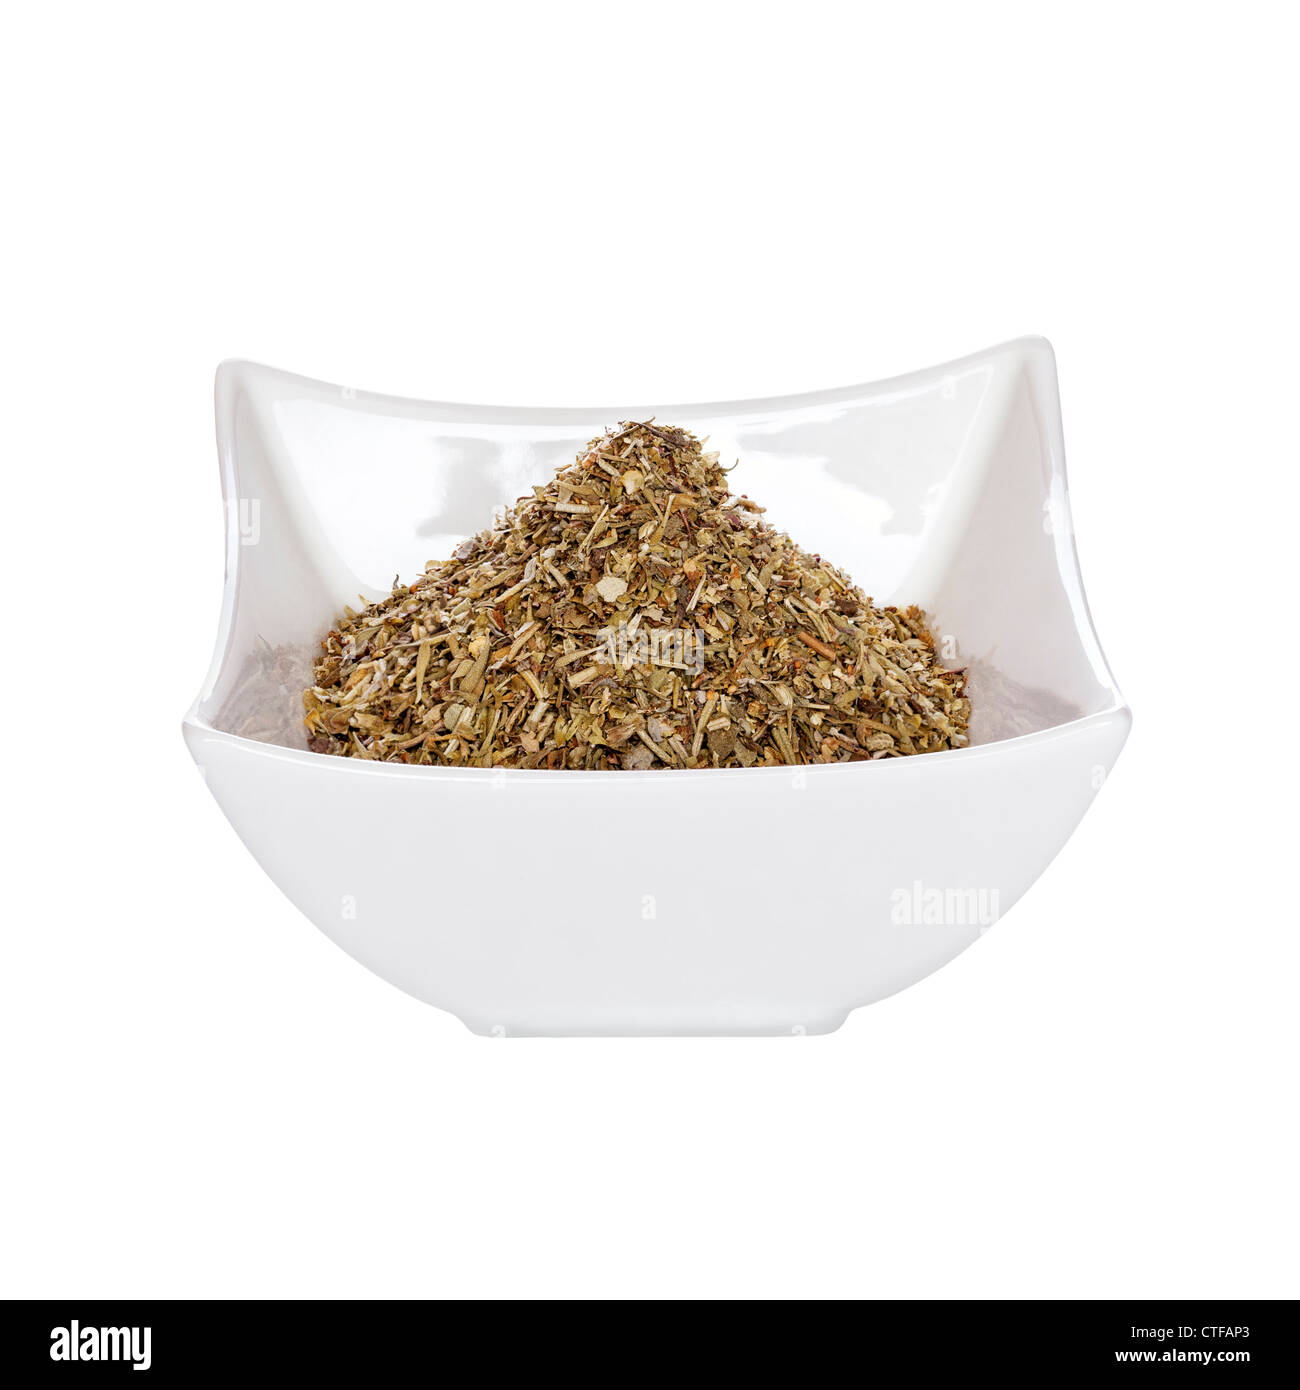 A small pot of dried mixed herbs, isolated on white. Fully in focus, front to back. Stock Photo